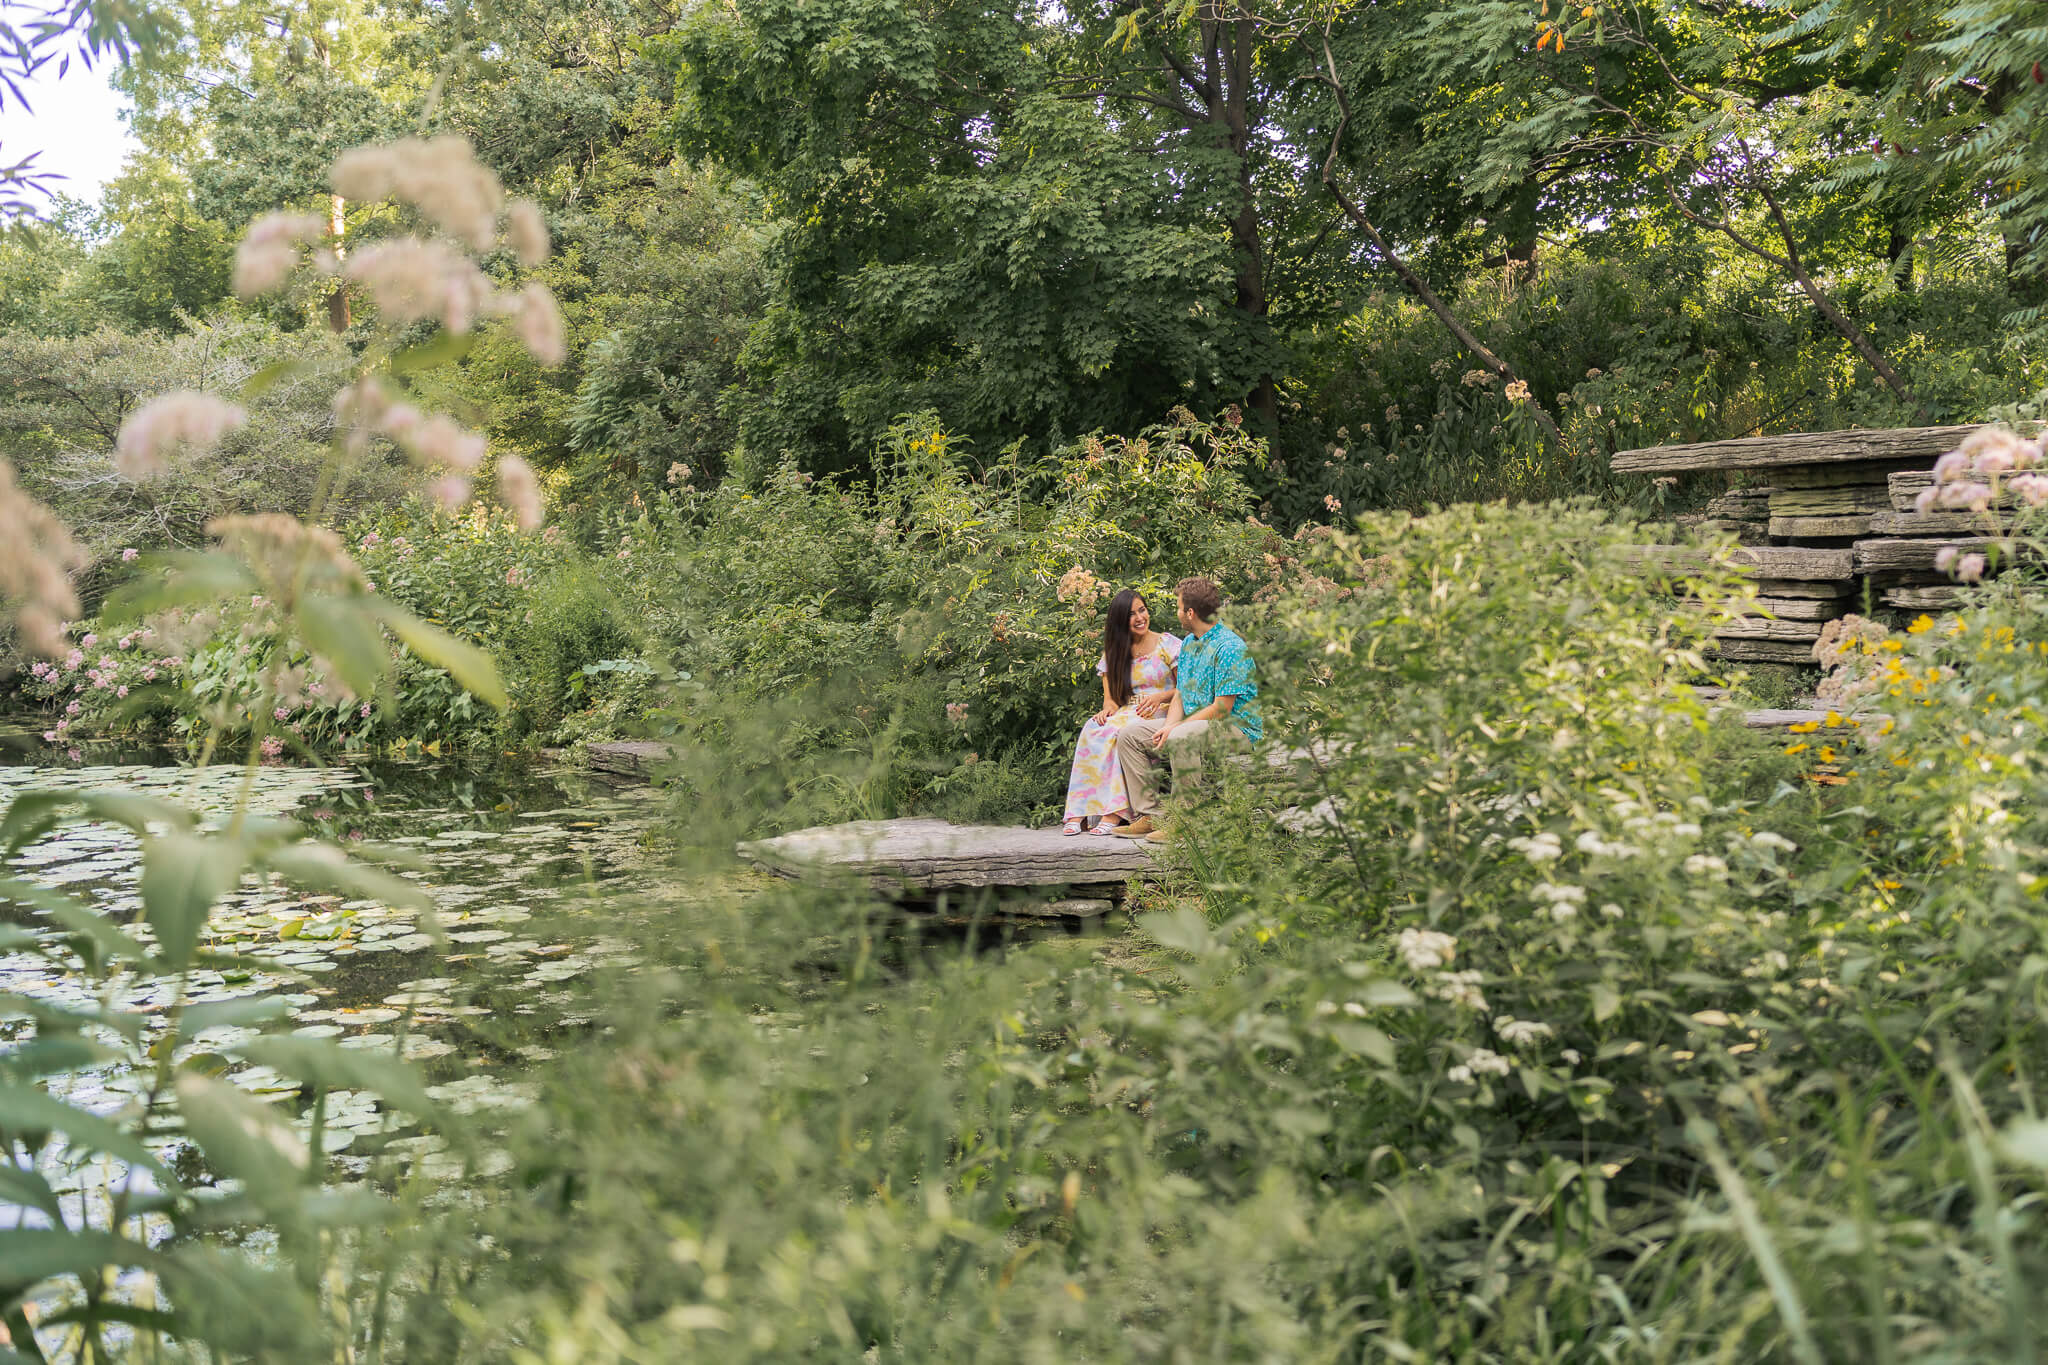 A couple sits on a bench, nestled in the greenery at the Lily Pool.
